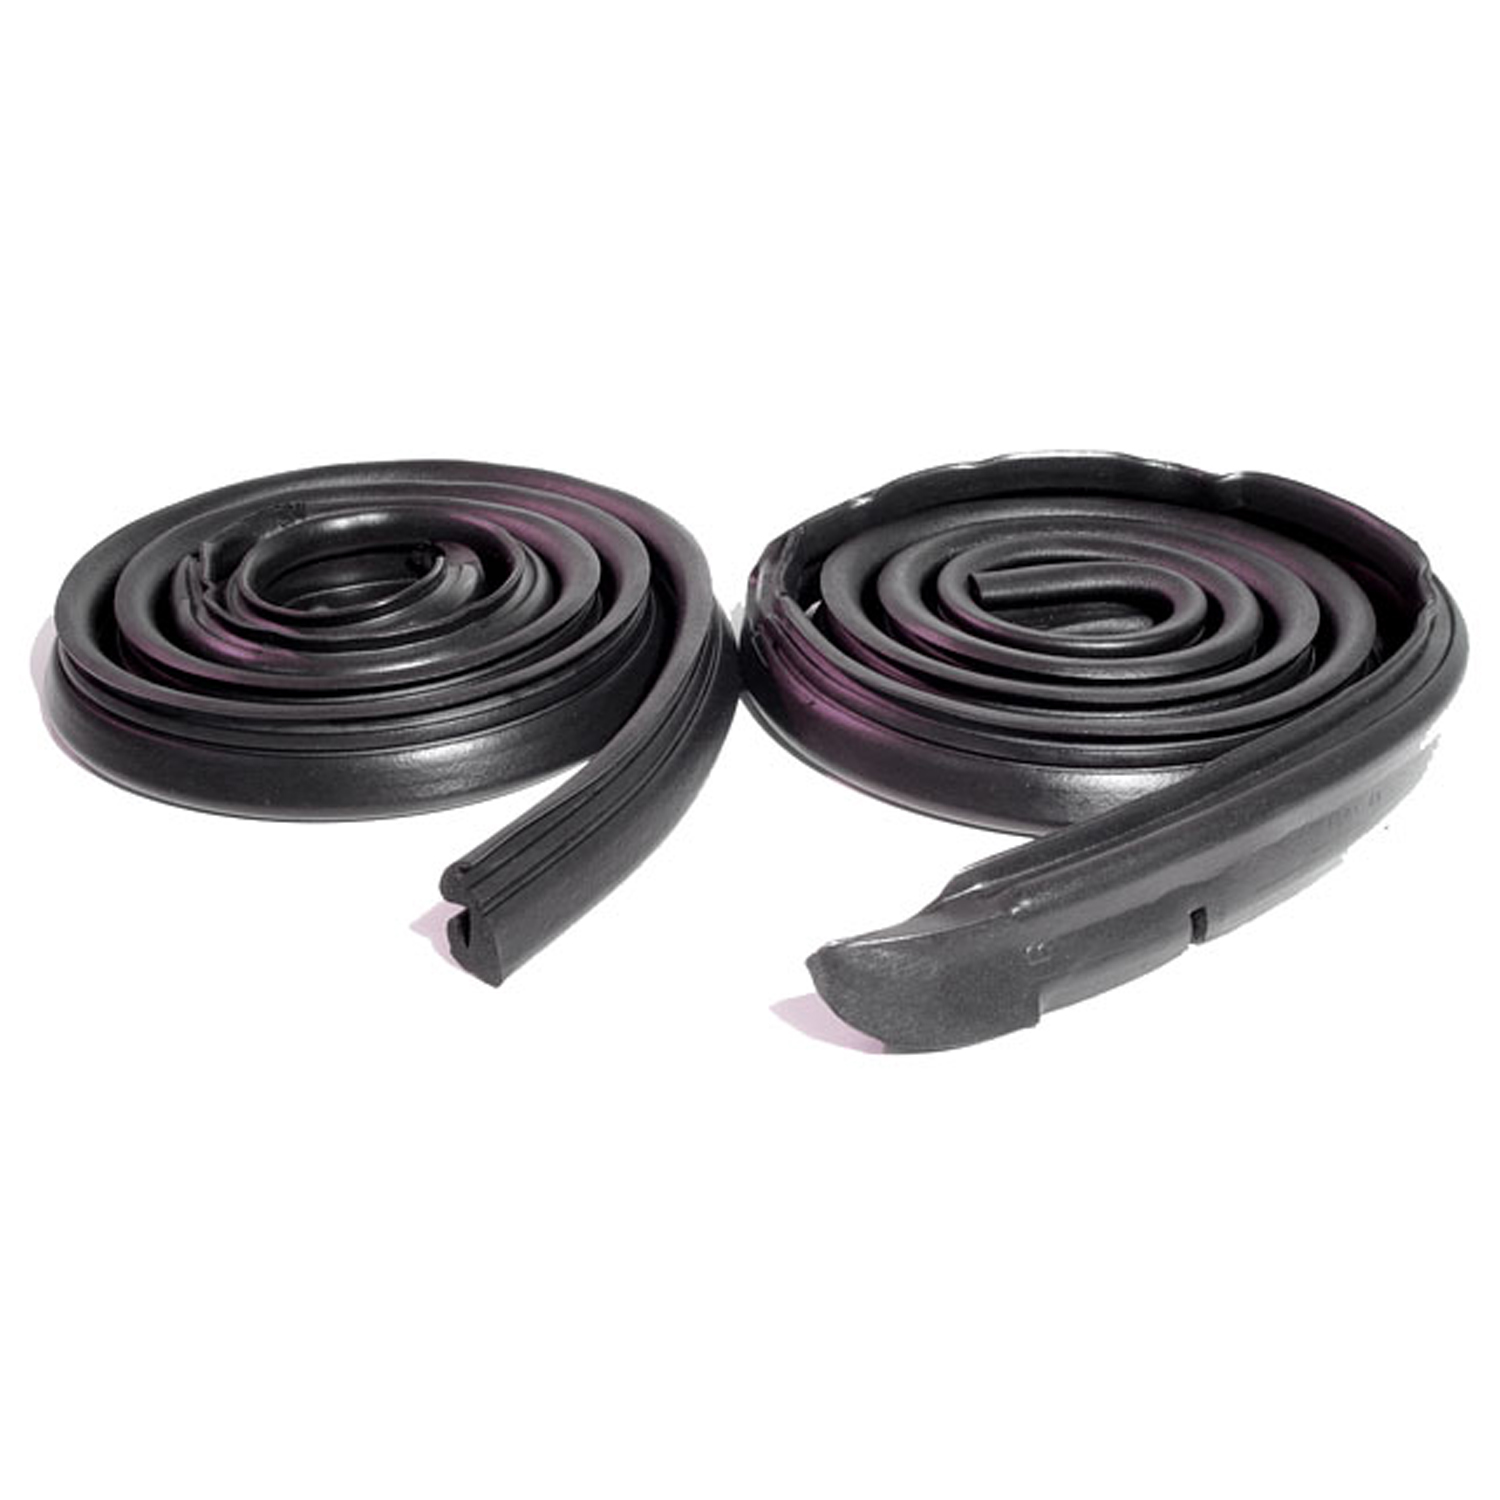 1967 Plymouth Fury Molded Roof Rail Seals, for 2-Door Hardtop without Post-RR 4001-C